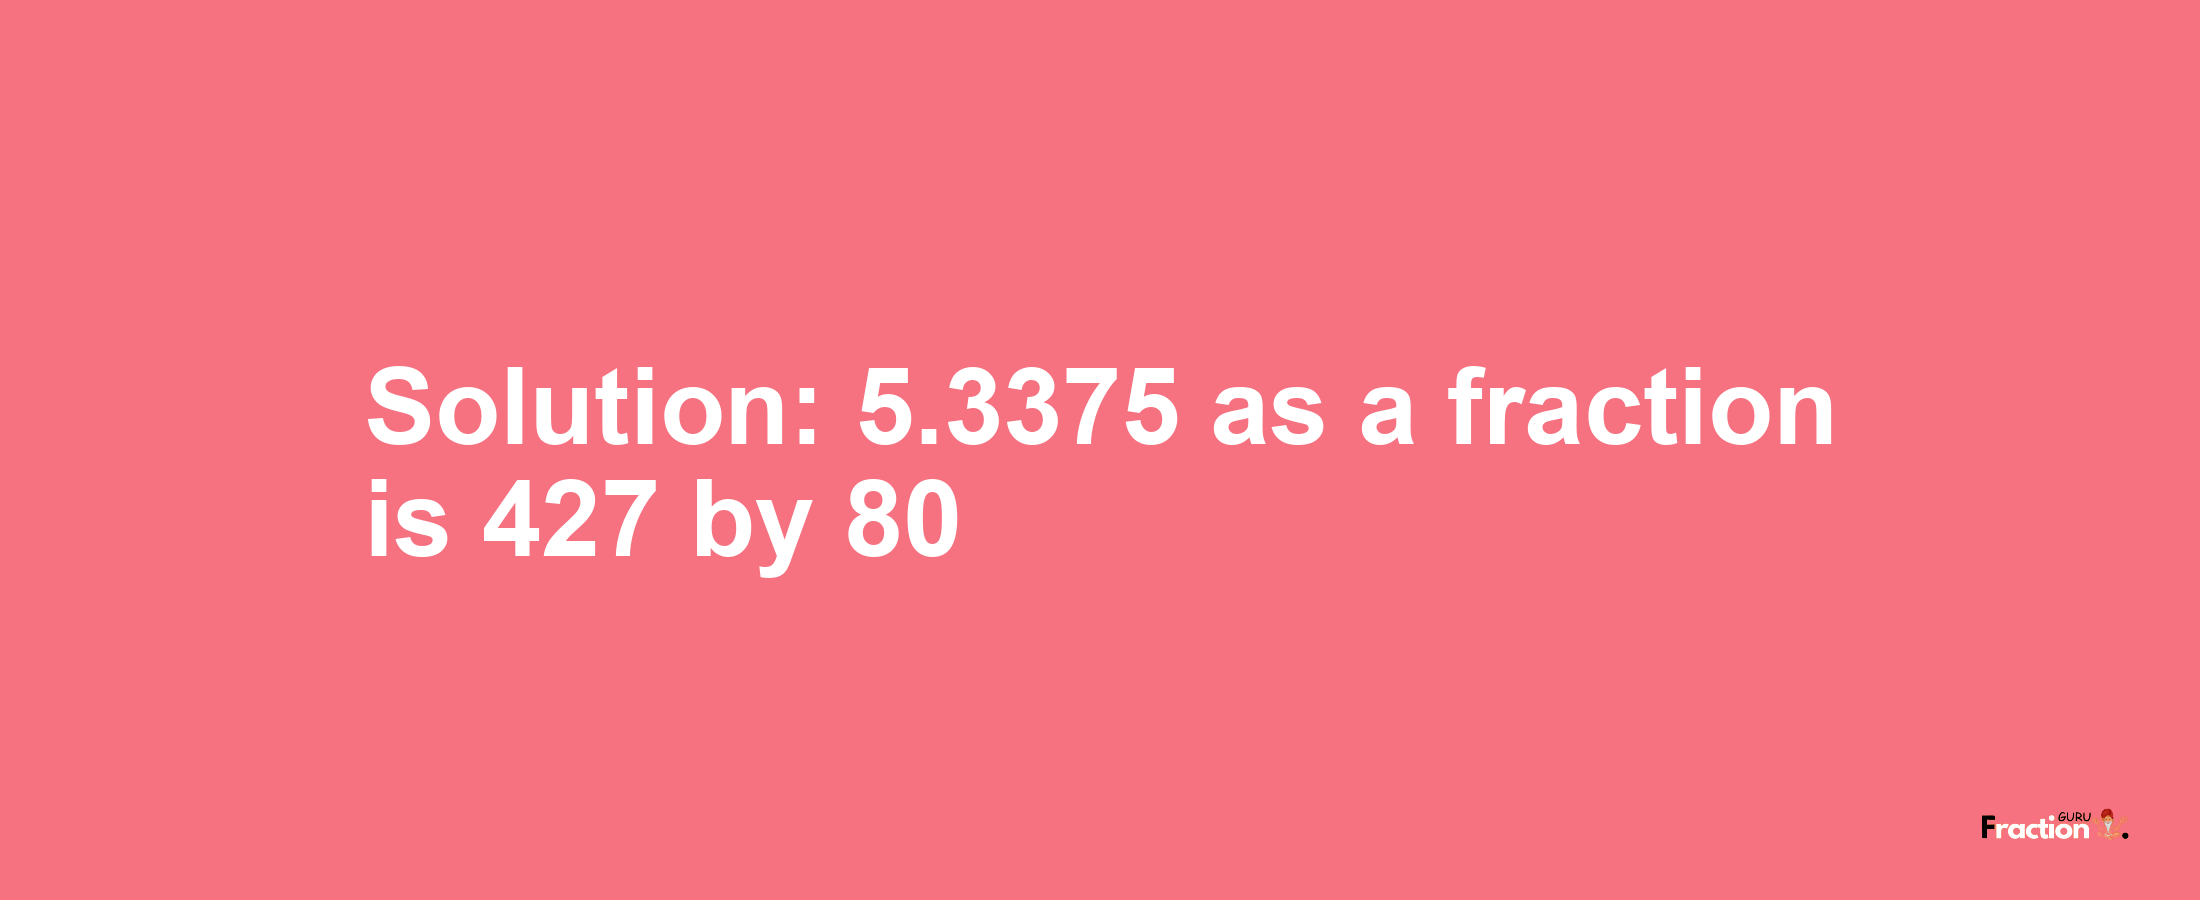 Solution:5.3375 as a fraction is 427/80